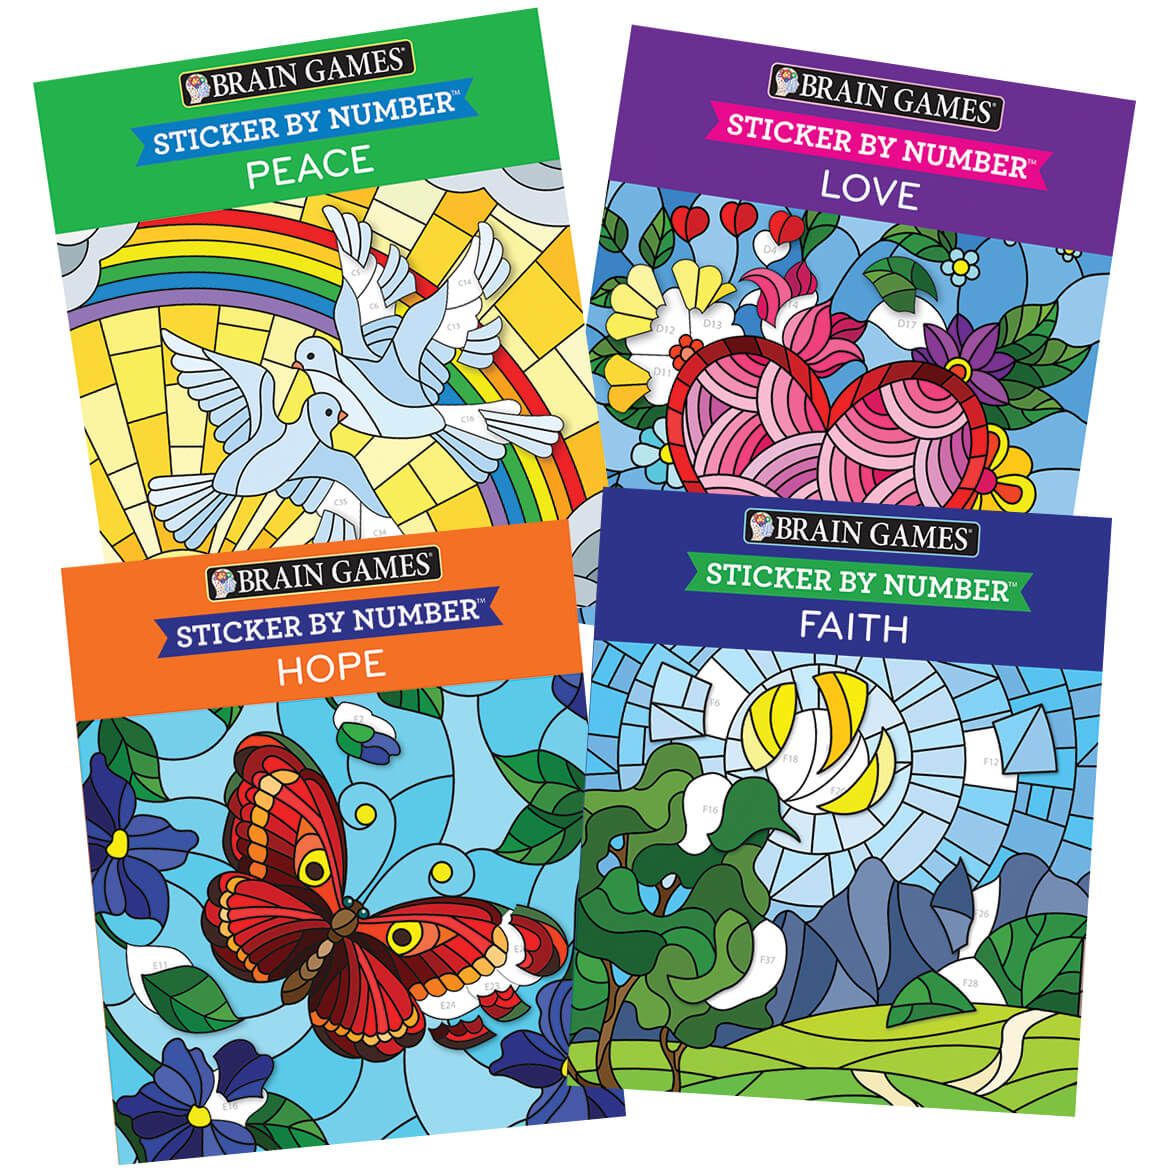 Brain Games® Sticker By Number Faith Books Set of 4 + '-' + 371358